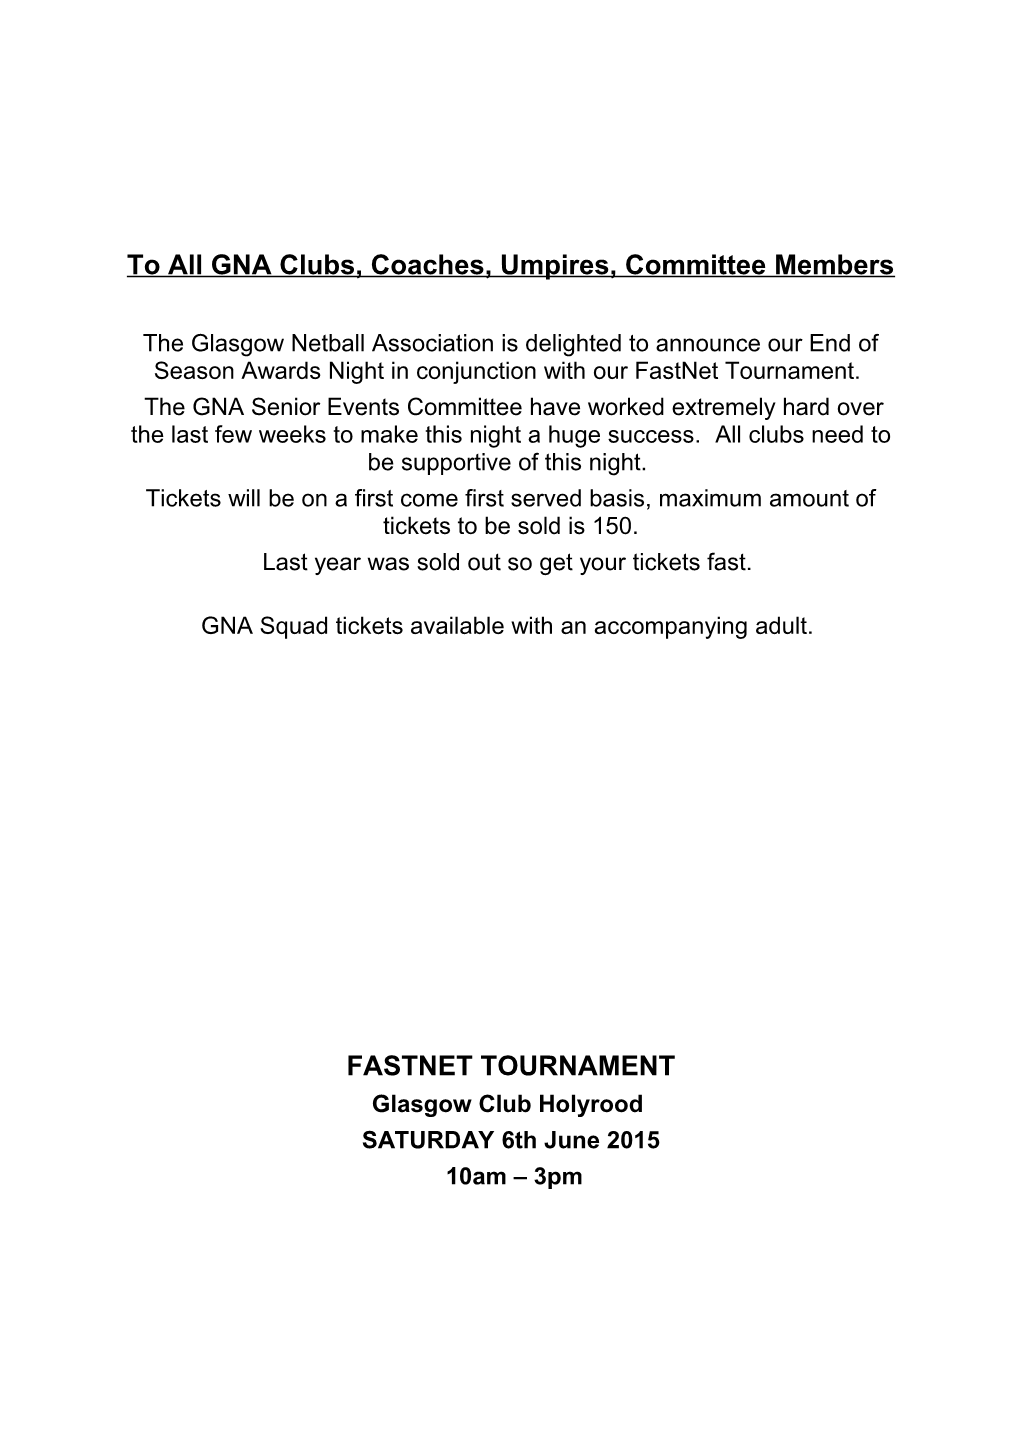 To All GNA Clubs, Coaches, Umpires, Committee Members